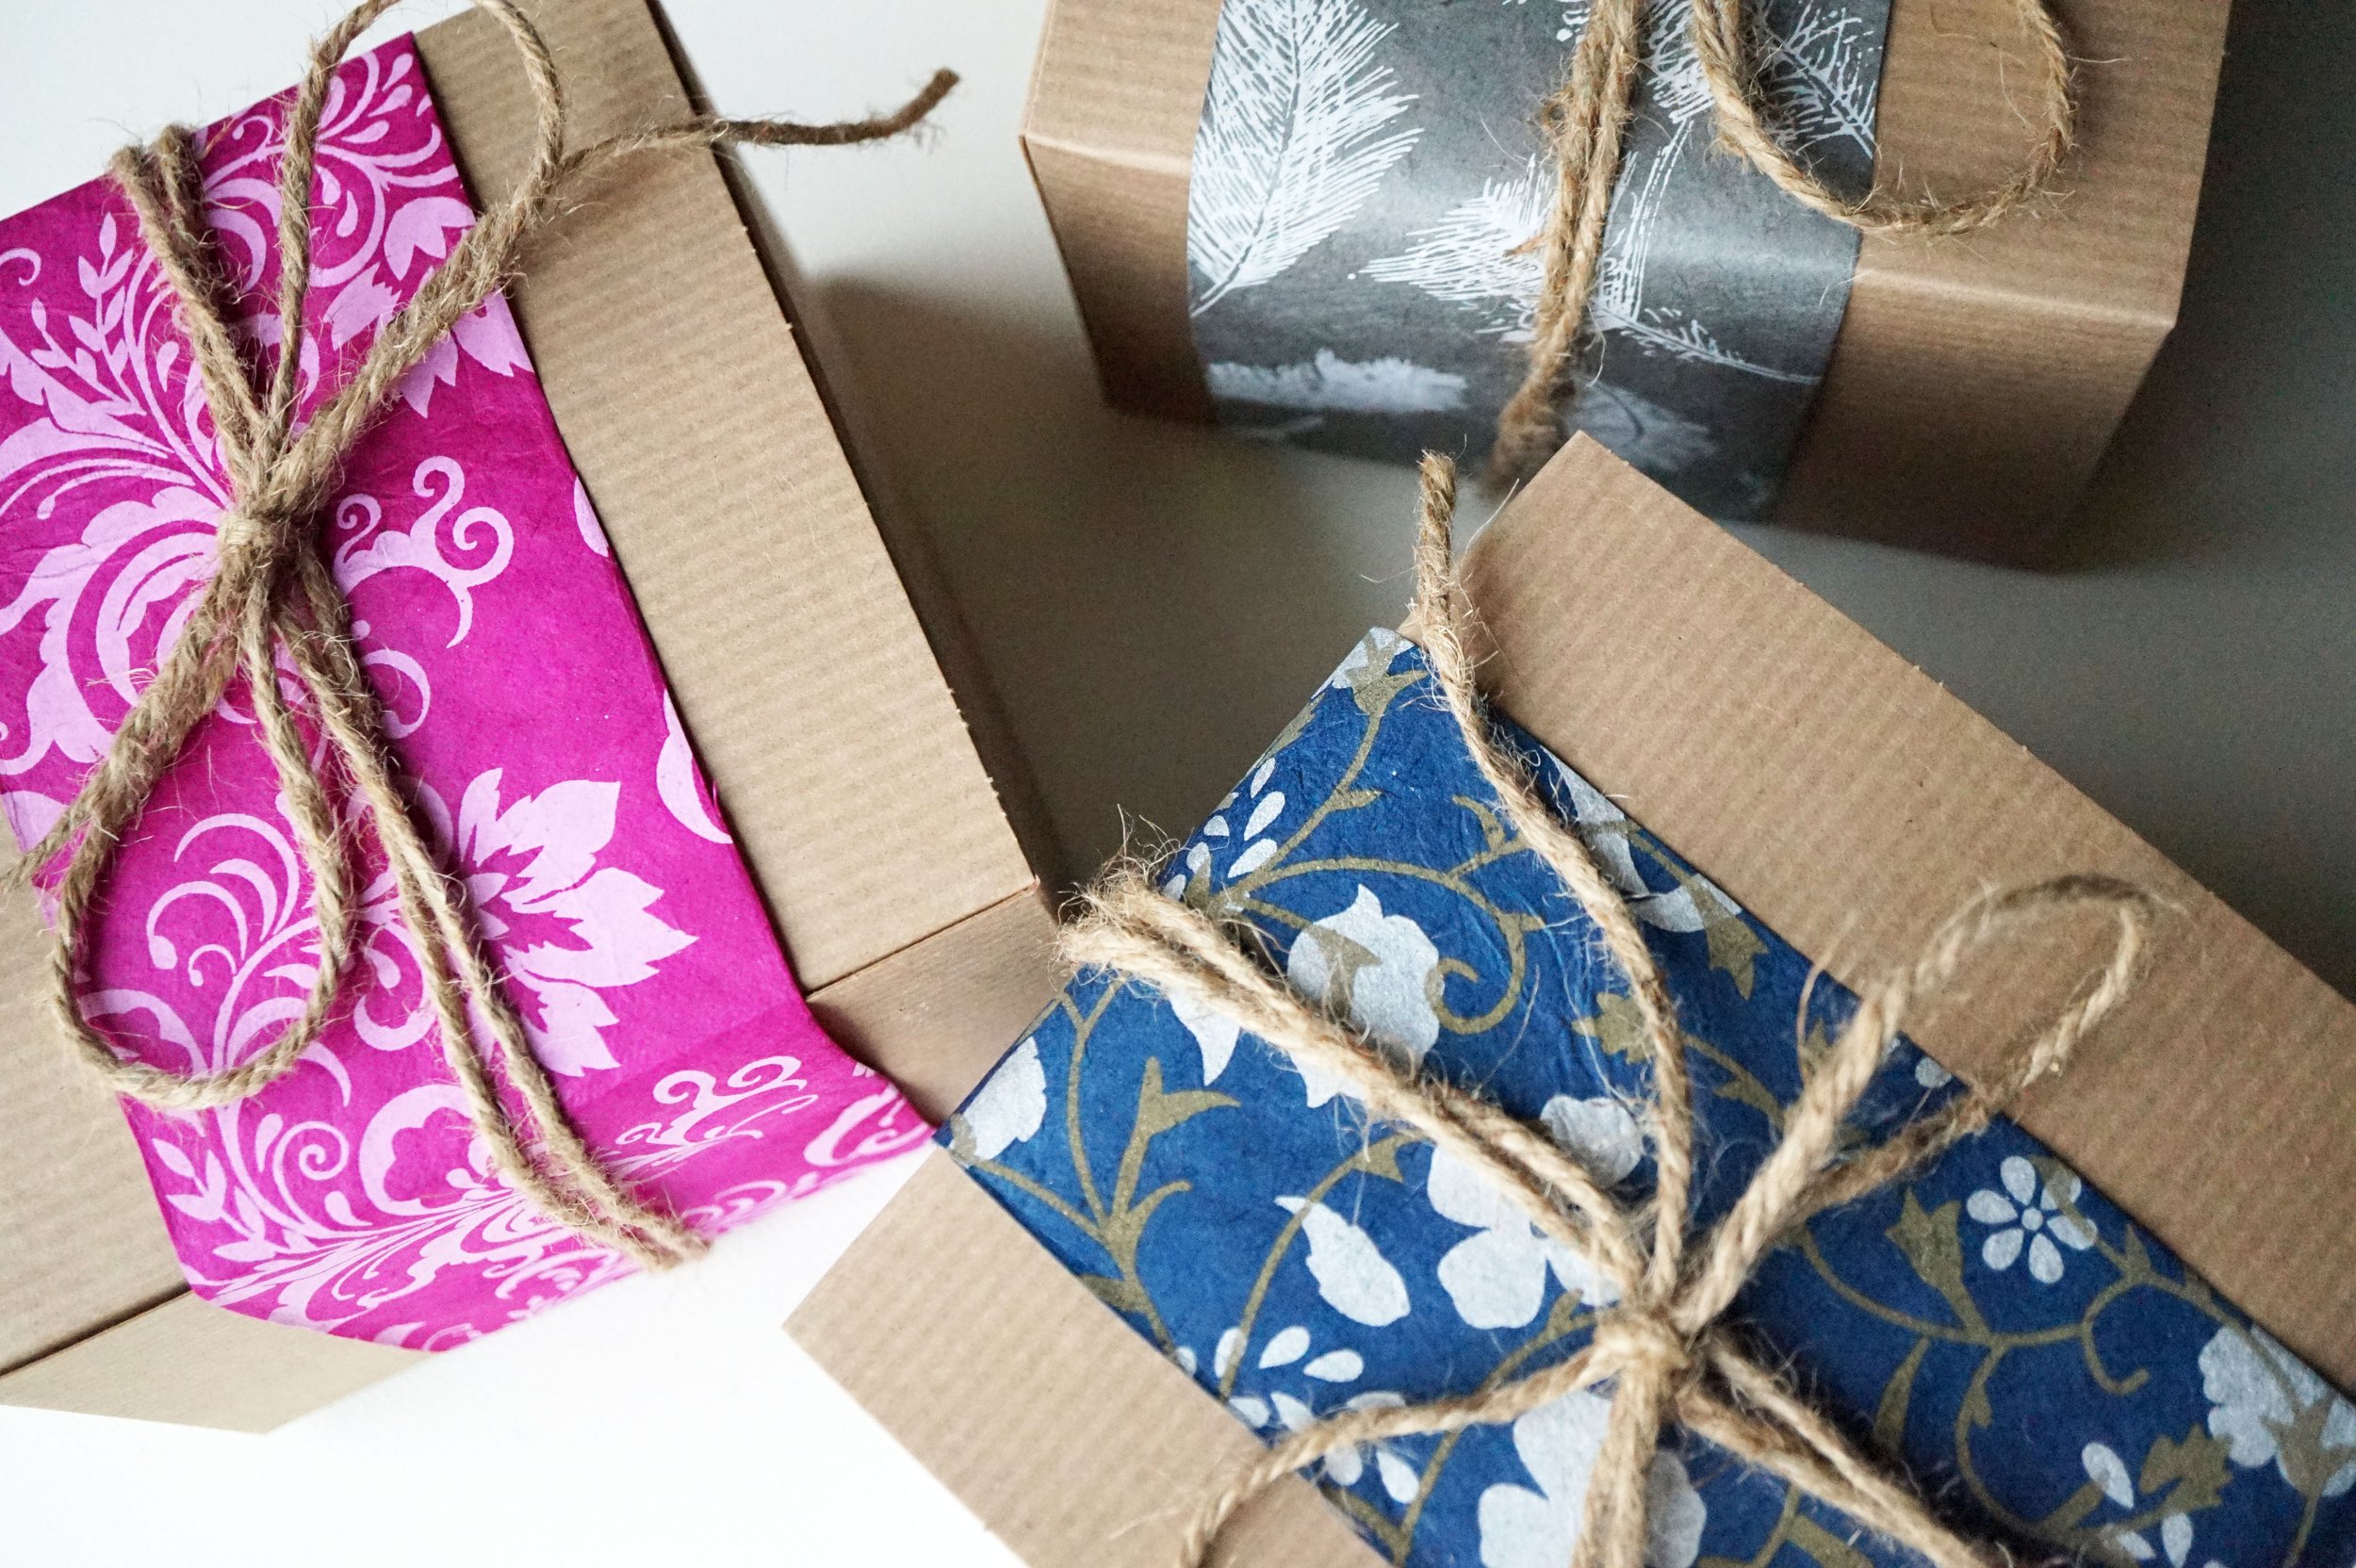 How to Wrap a Gift — A Glue Gun Is Your Secret Weapon for